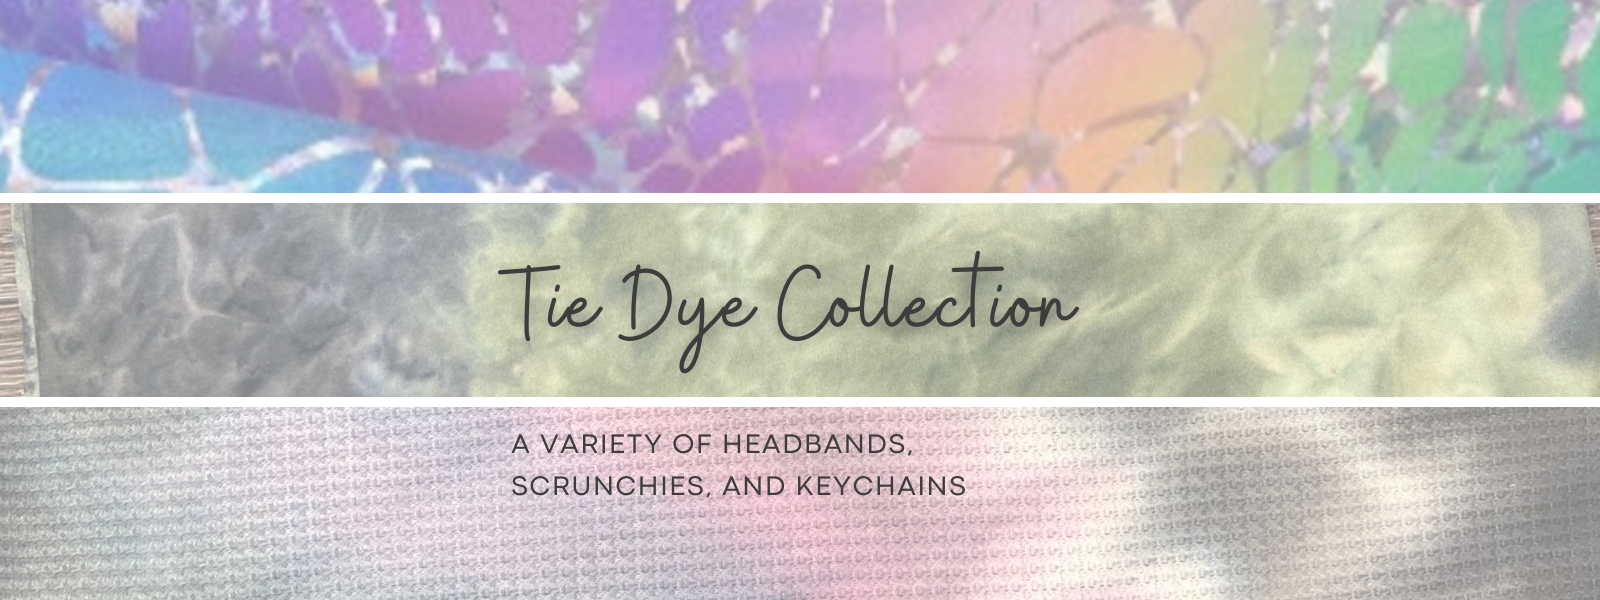 View the tie dye collection of headbands and scrunchies